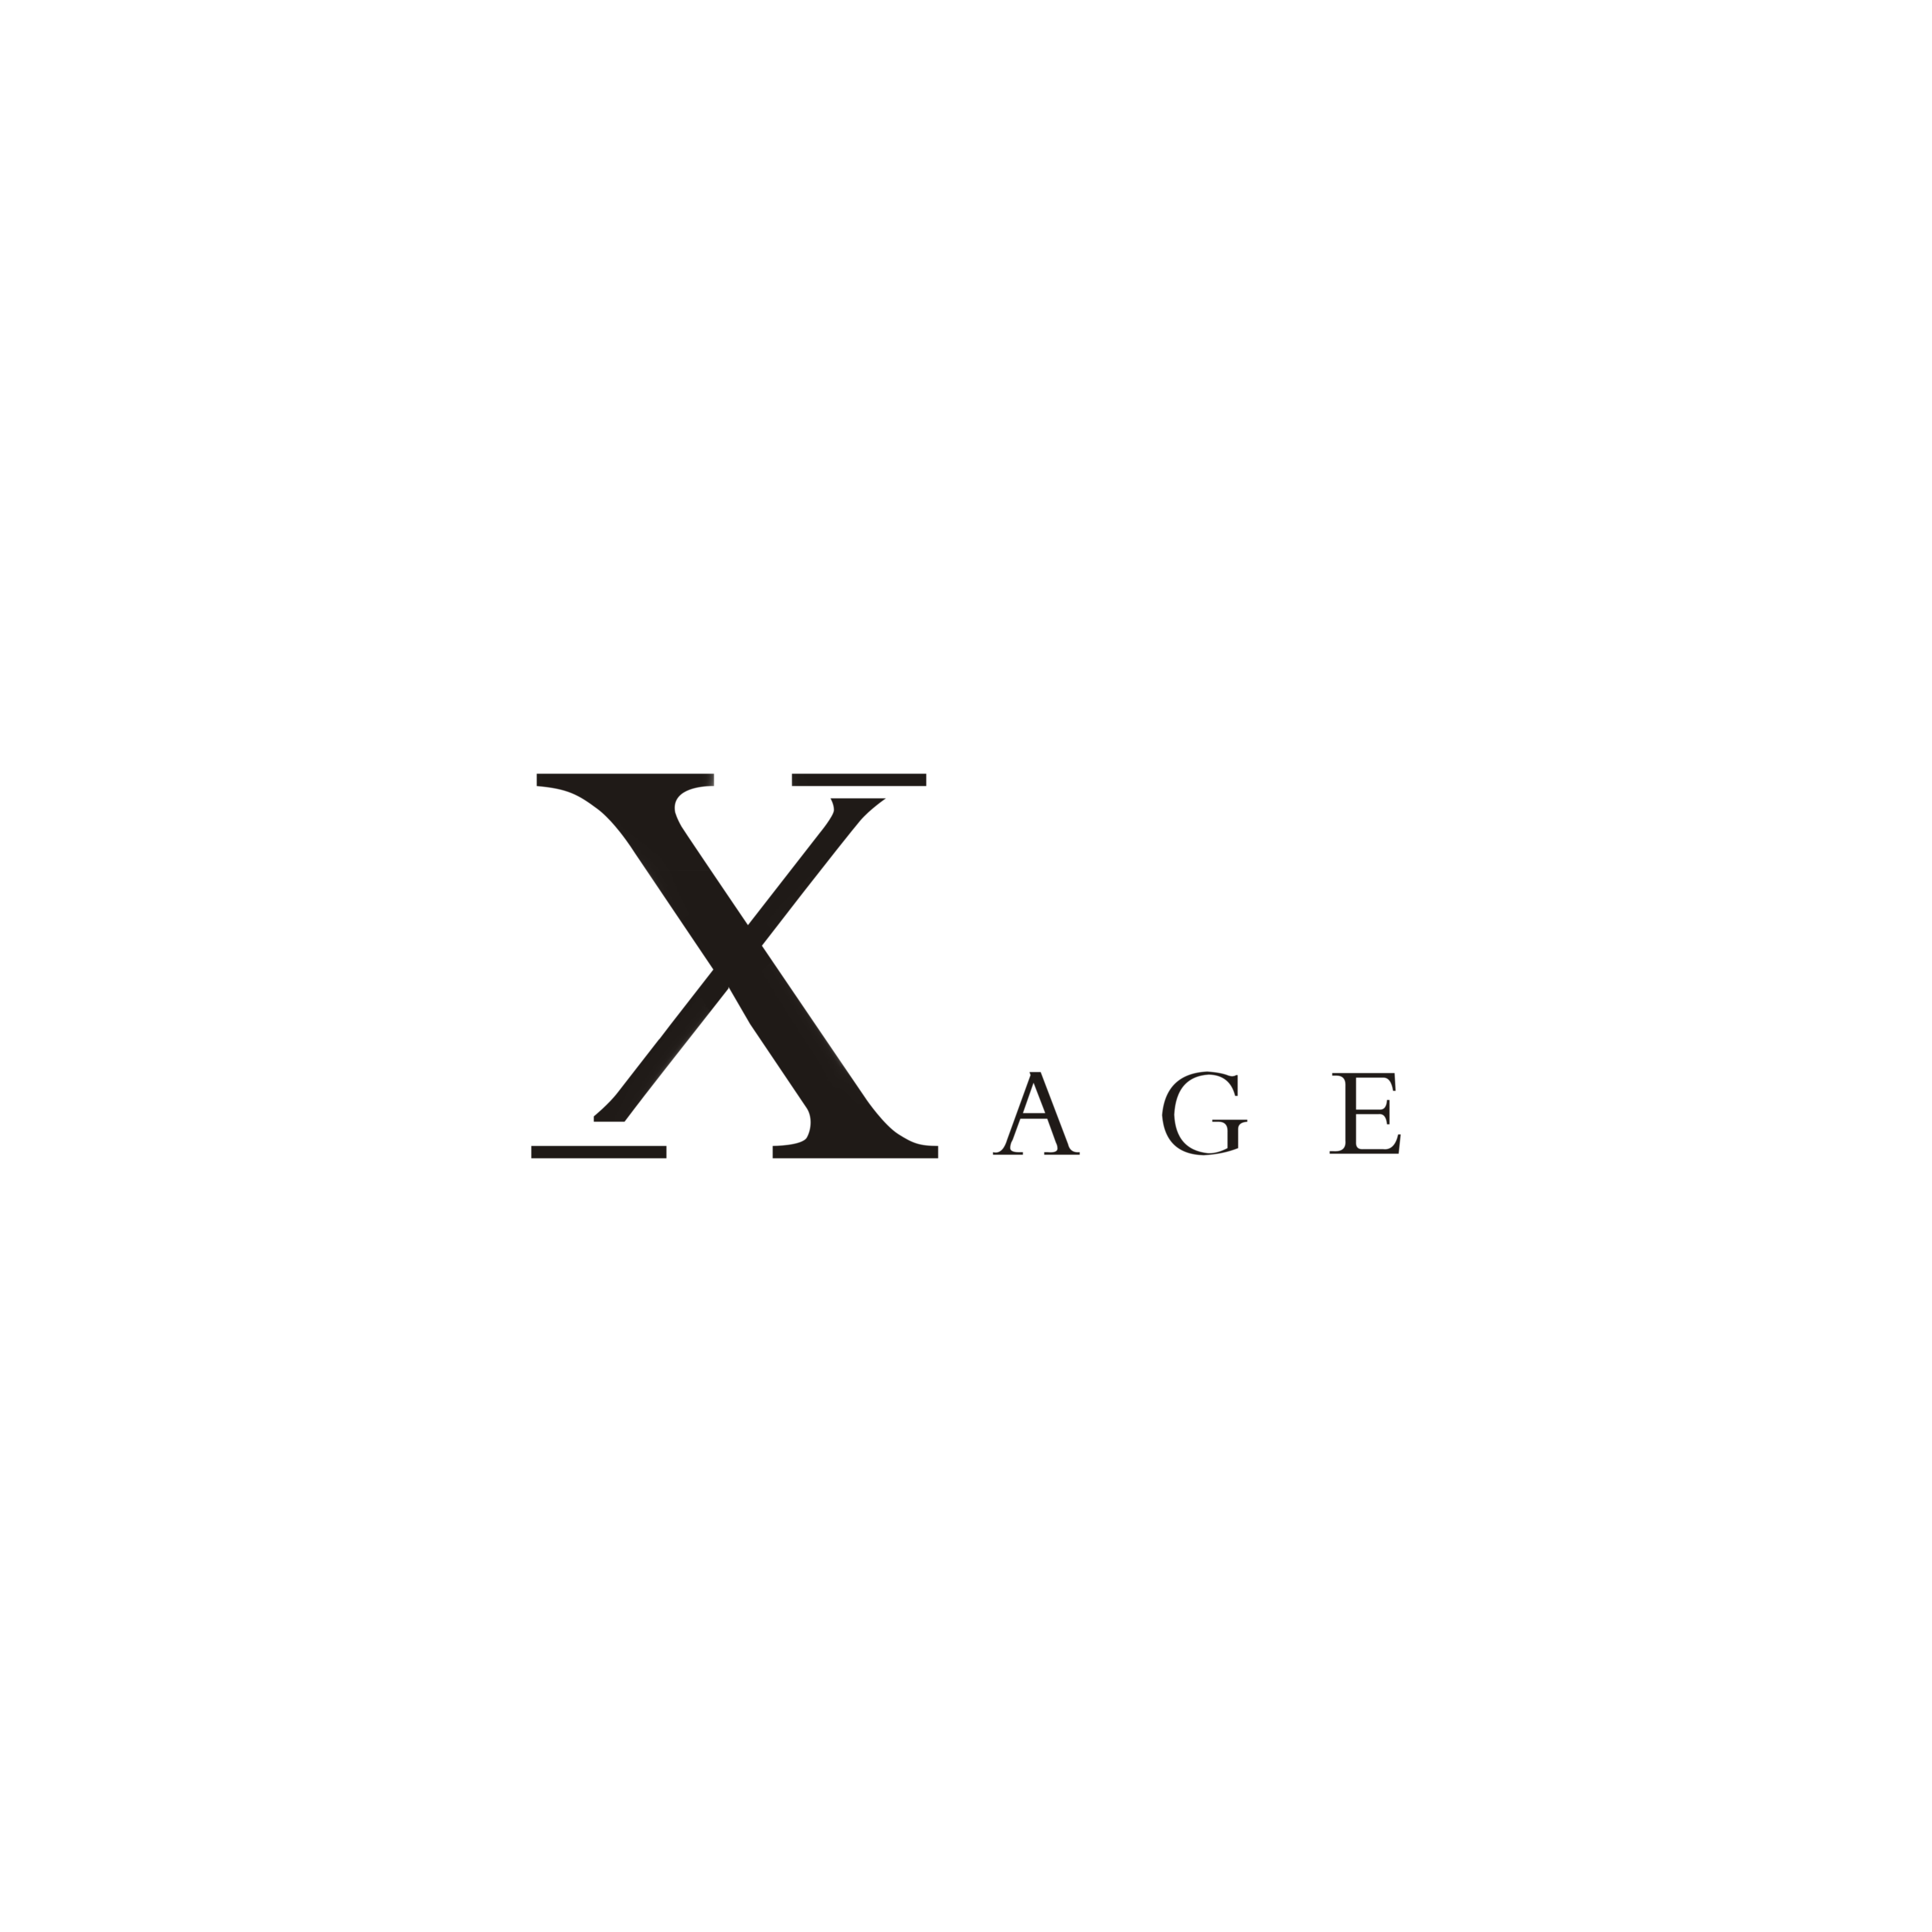 XAGE limited